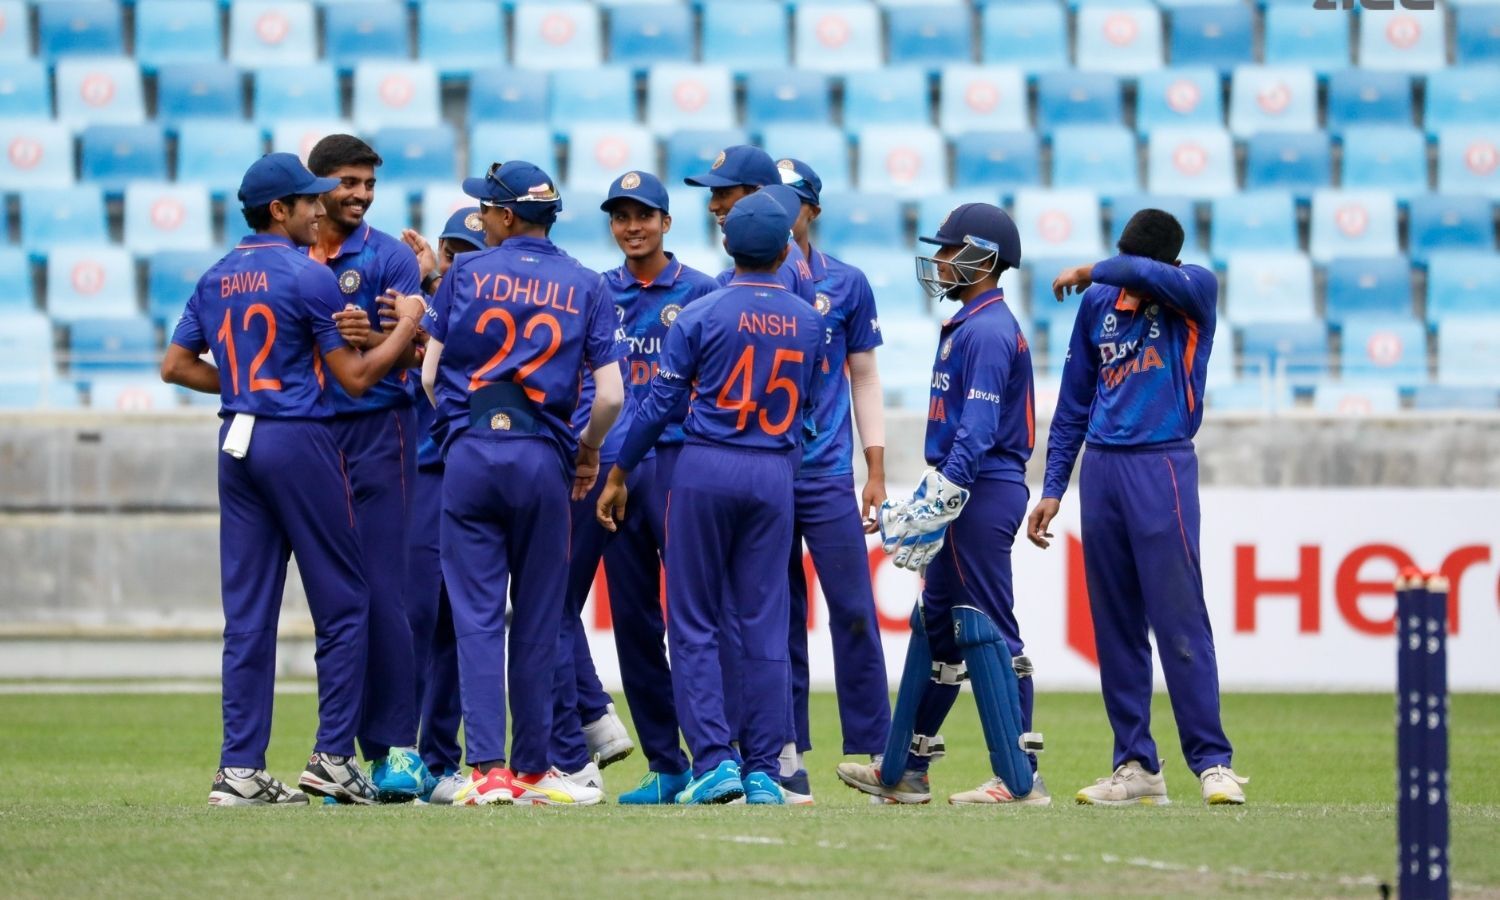 u19 world cup 2022 live score today